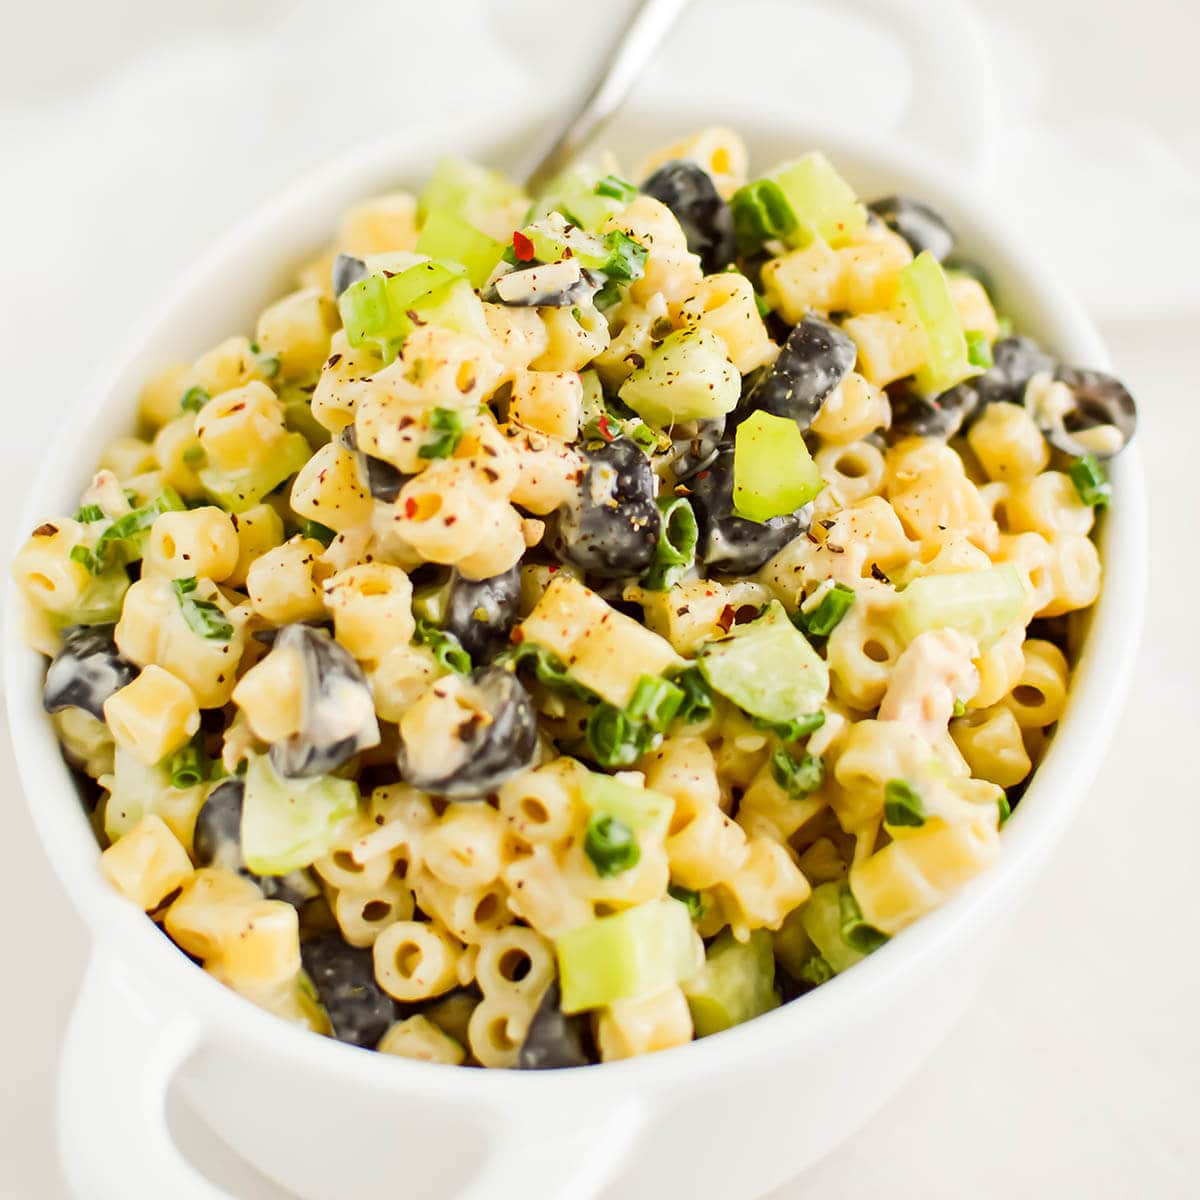 Pasta salad in bowl with serving spoon.